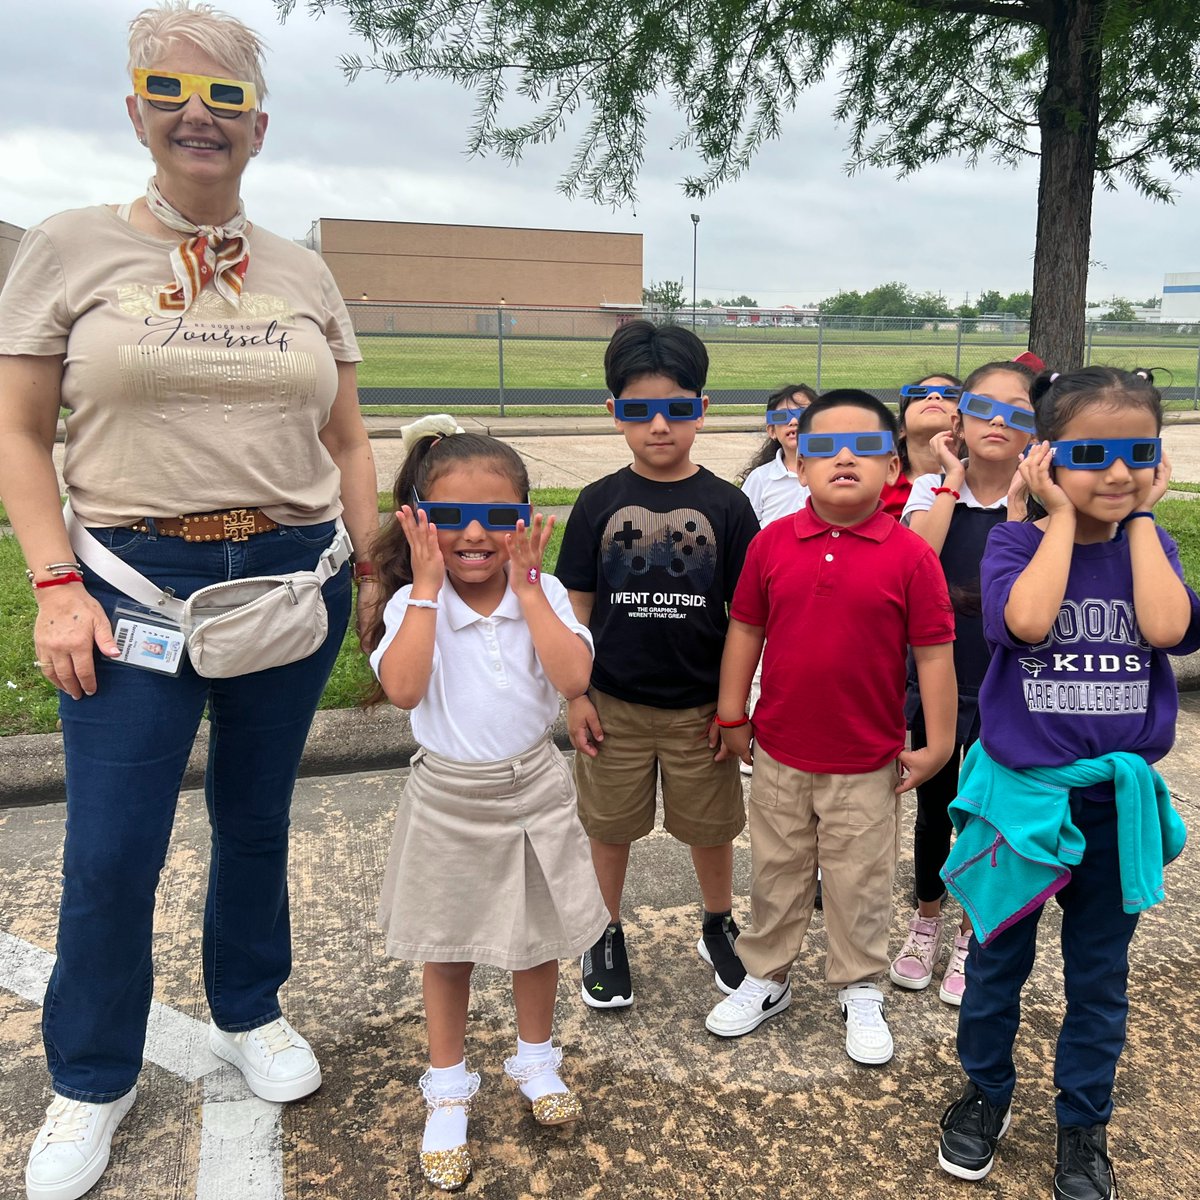 Experiencing the #solareclipse2024 at Boone🌘🌒 Were you able to see the eclipse?

#boonebears
#AliefProud
#WeAreAlief
@AliefISD 
@marlomolinaro